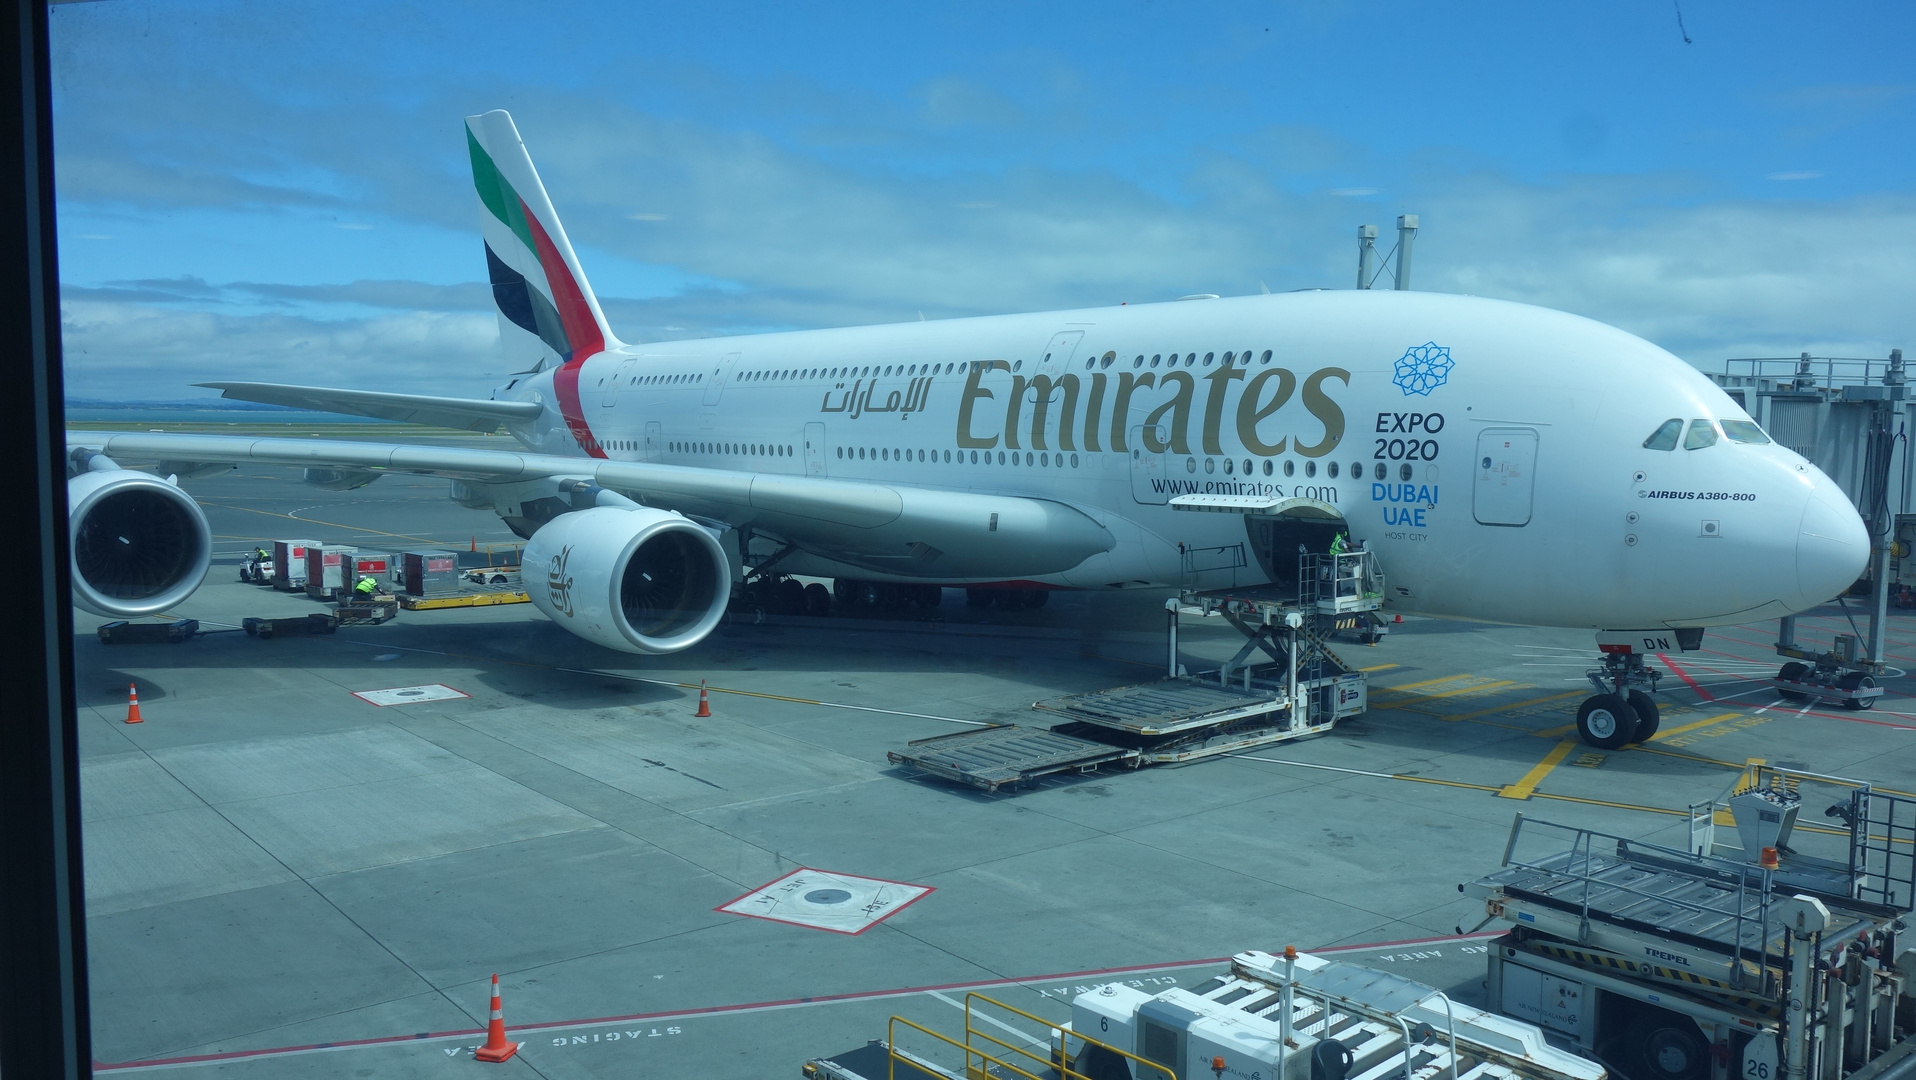 Airbus A380-800 in Auckland